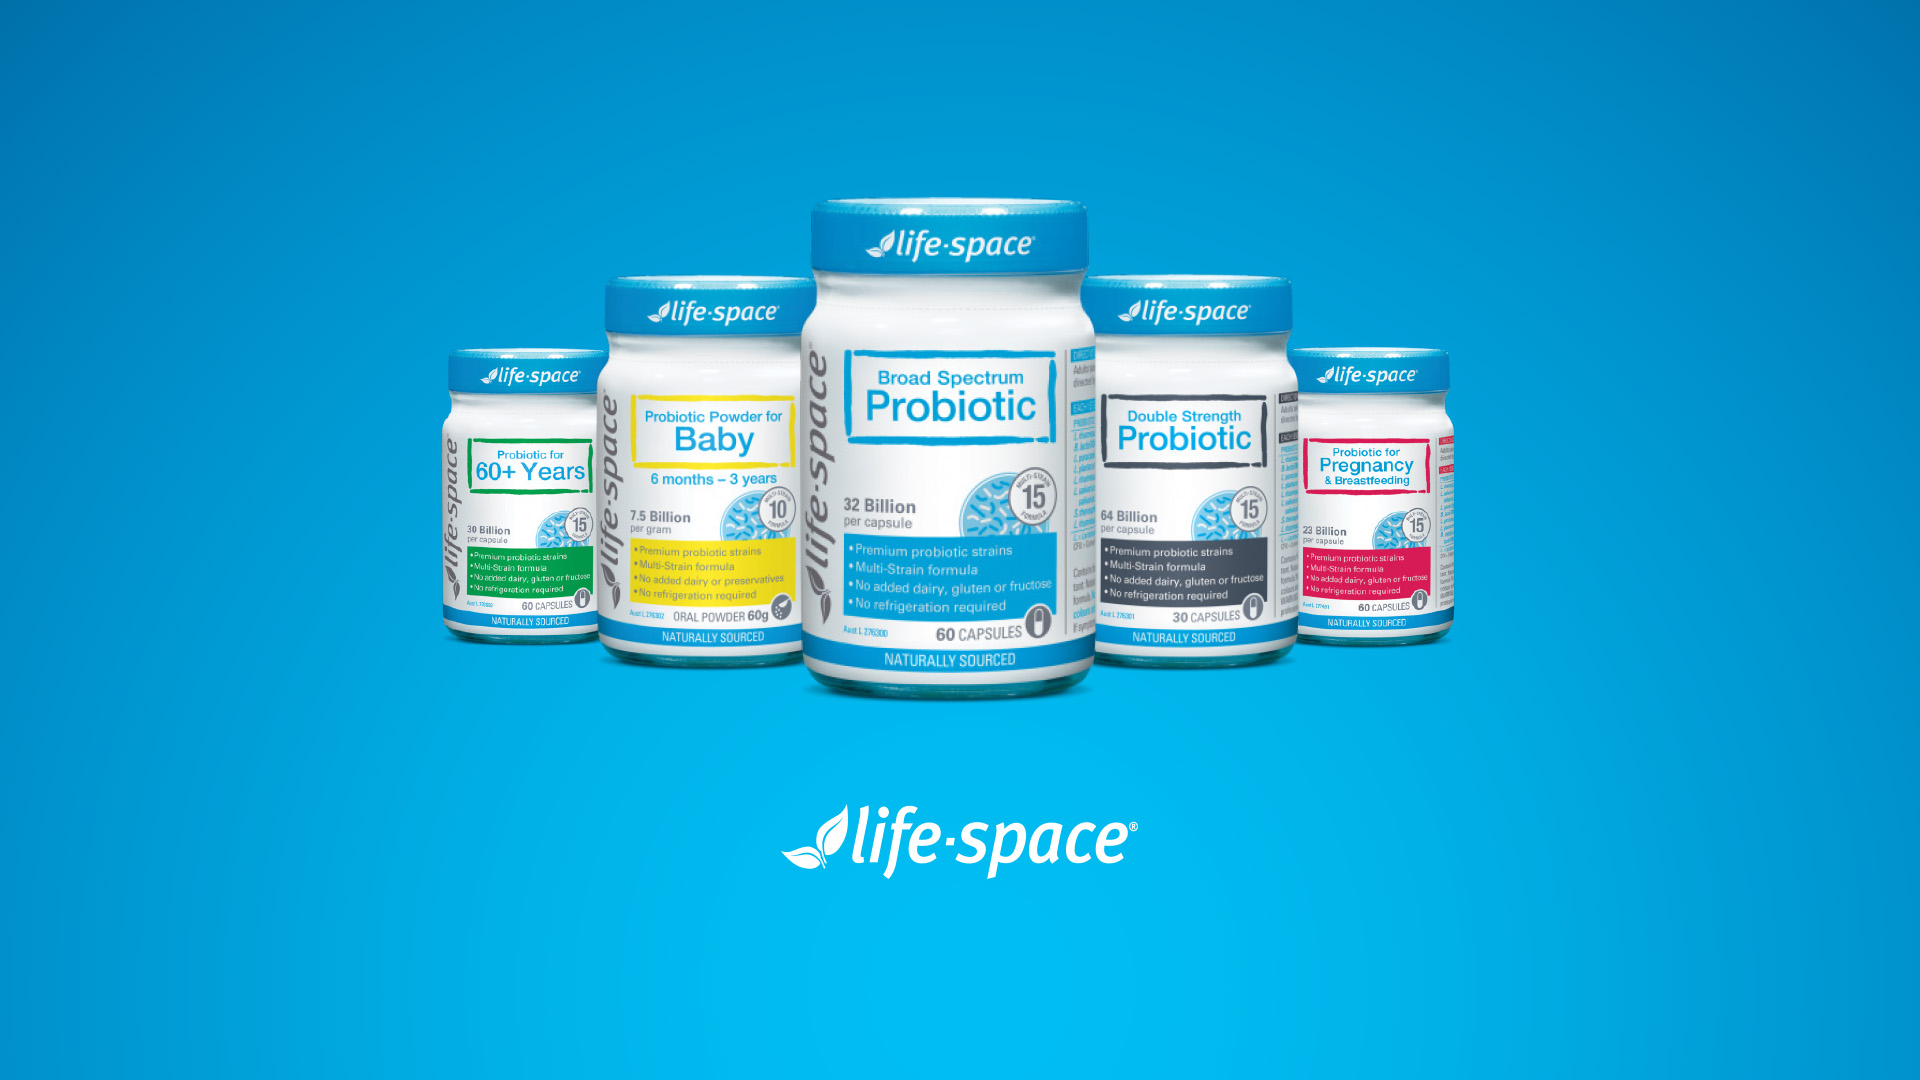 Life Space Probiotics Appoints Dig Fish To Creative Account